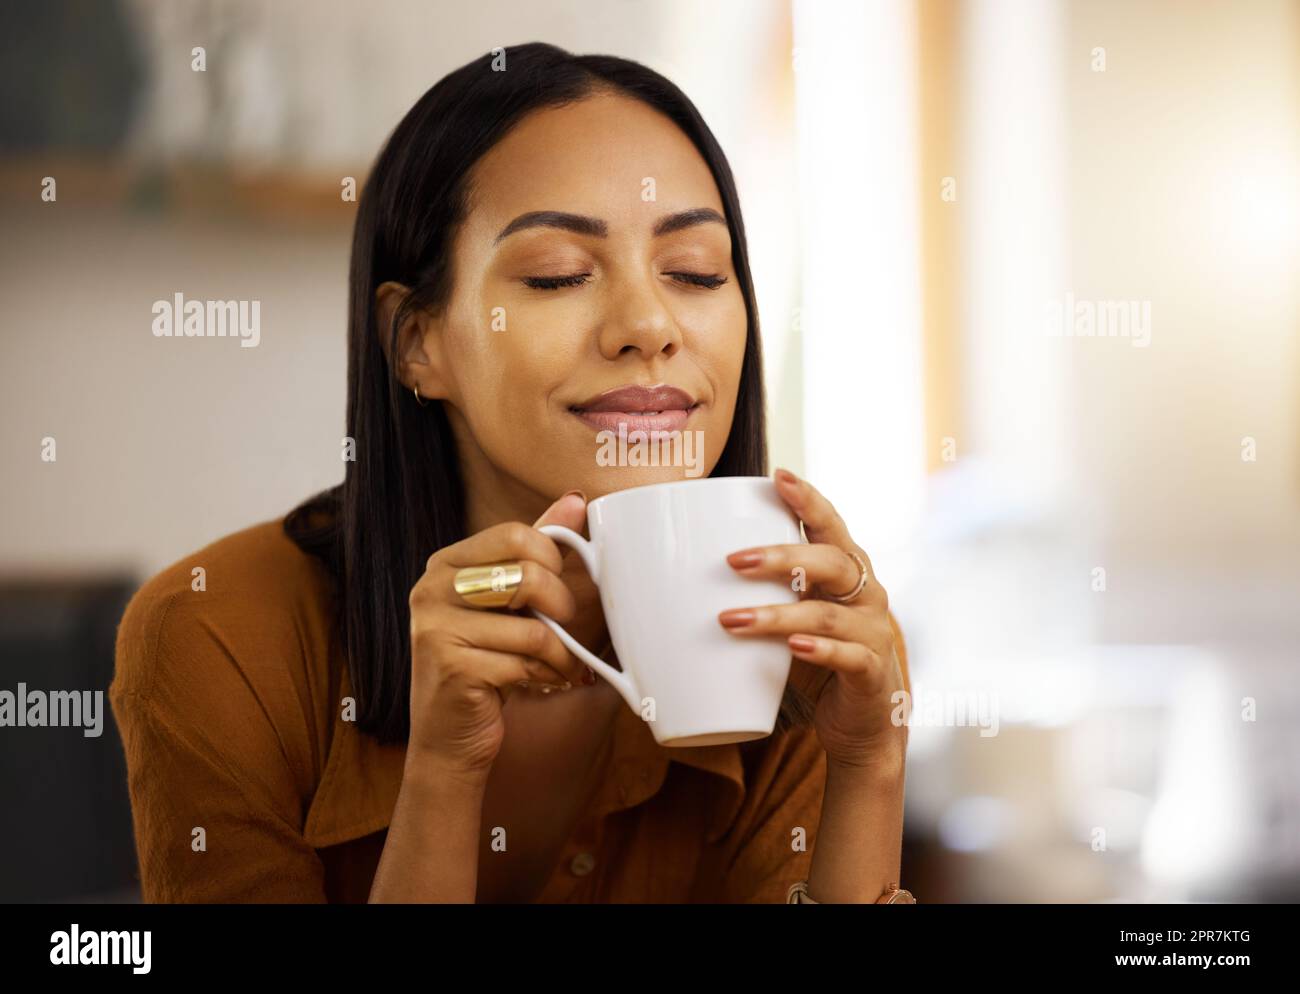 Young happy beautiful mixed race woman enjoying a cup of coffee alone at home. Hispanic female in her 20s smiling while drinking a cup of tea in the kitchen at home Stock Photo